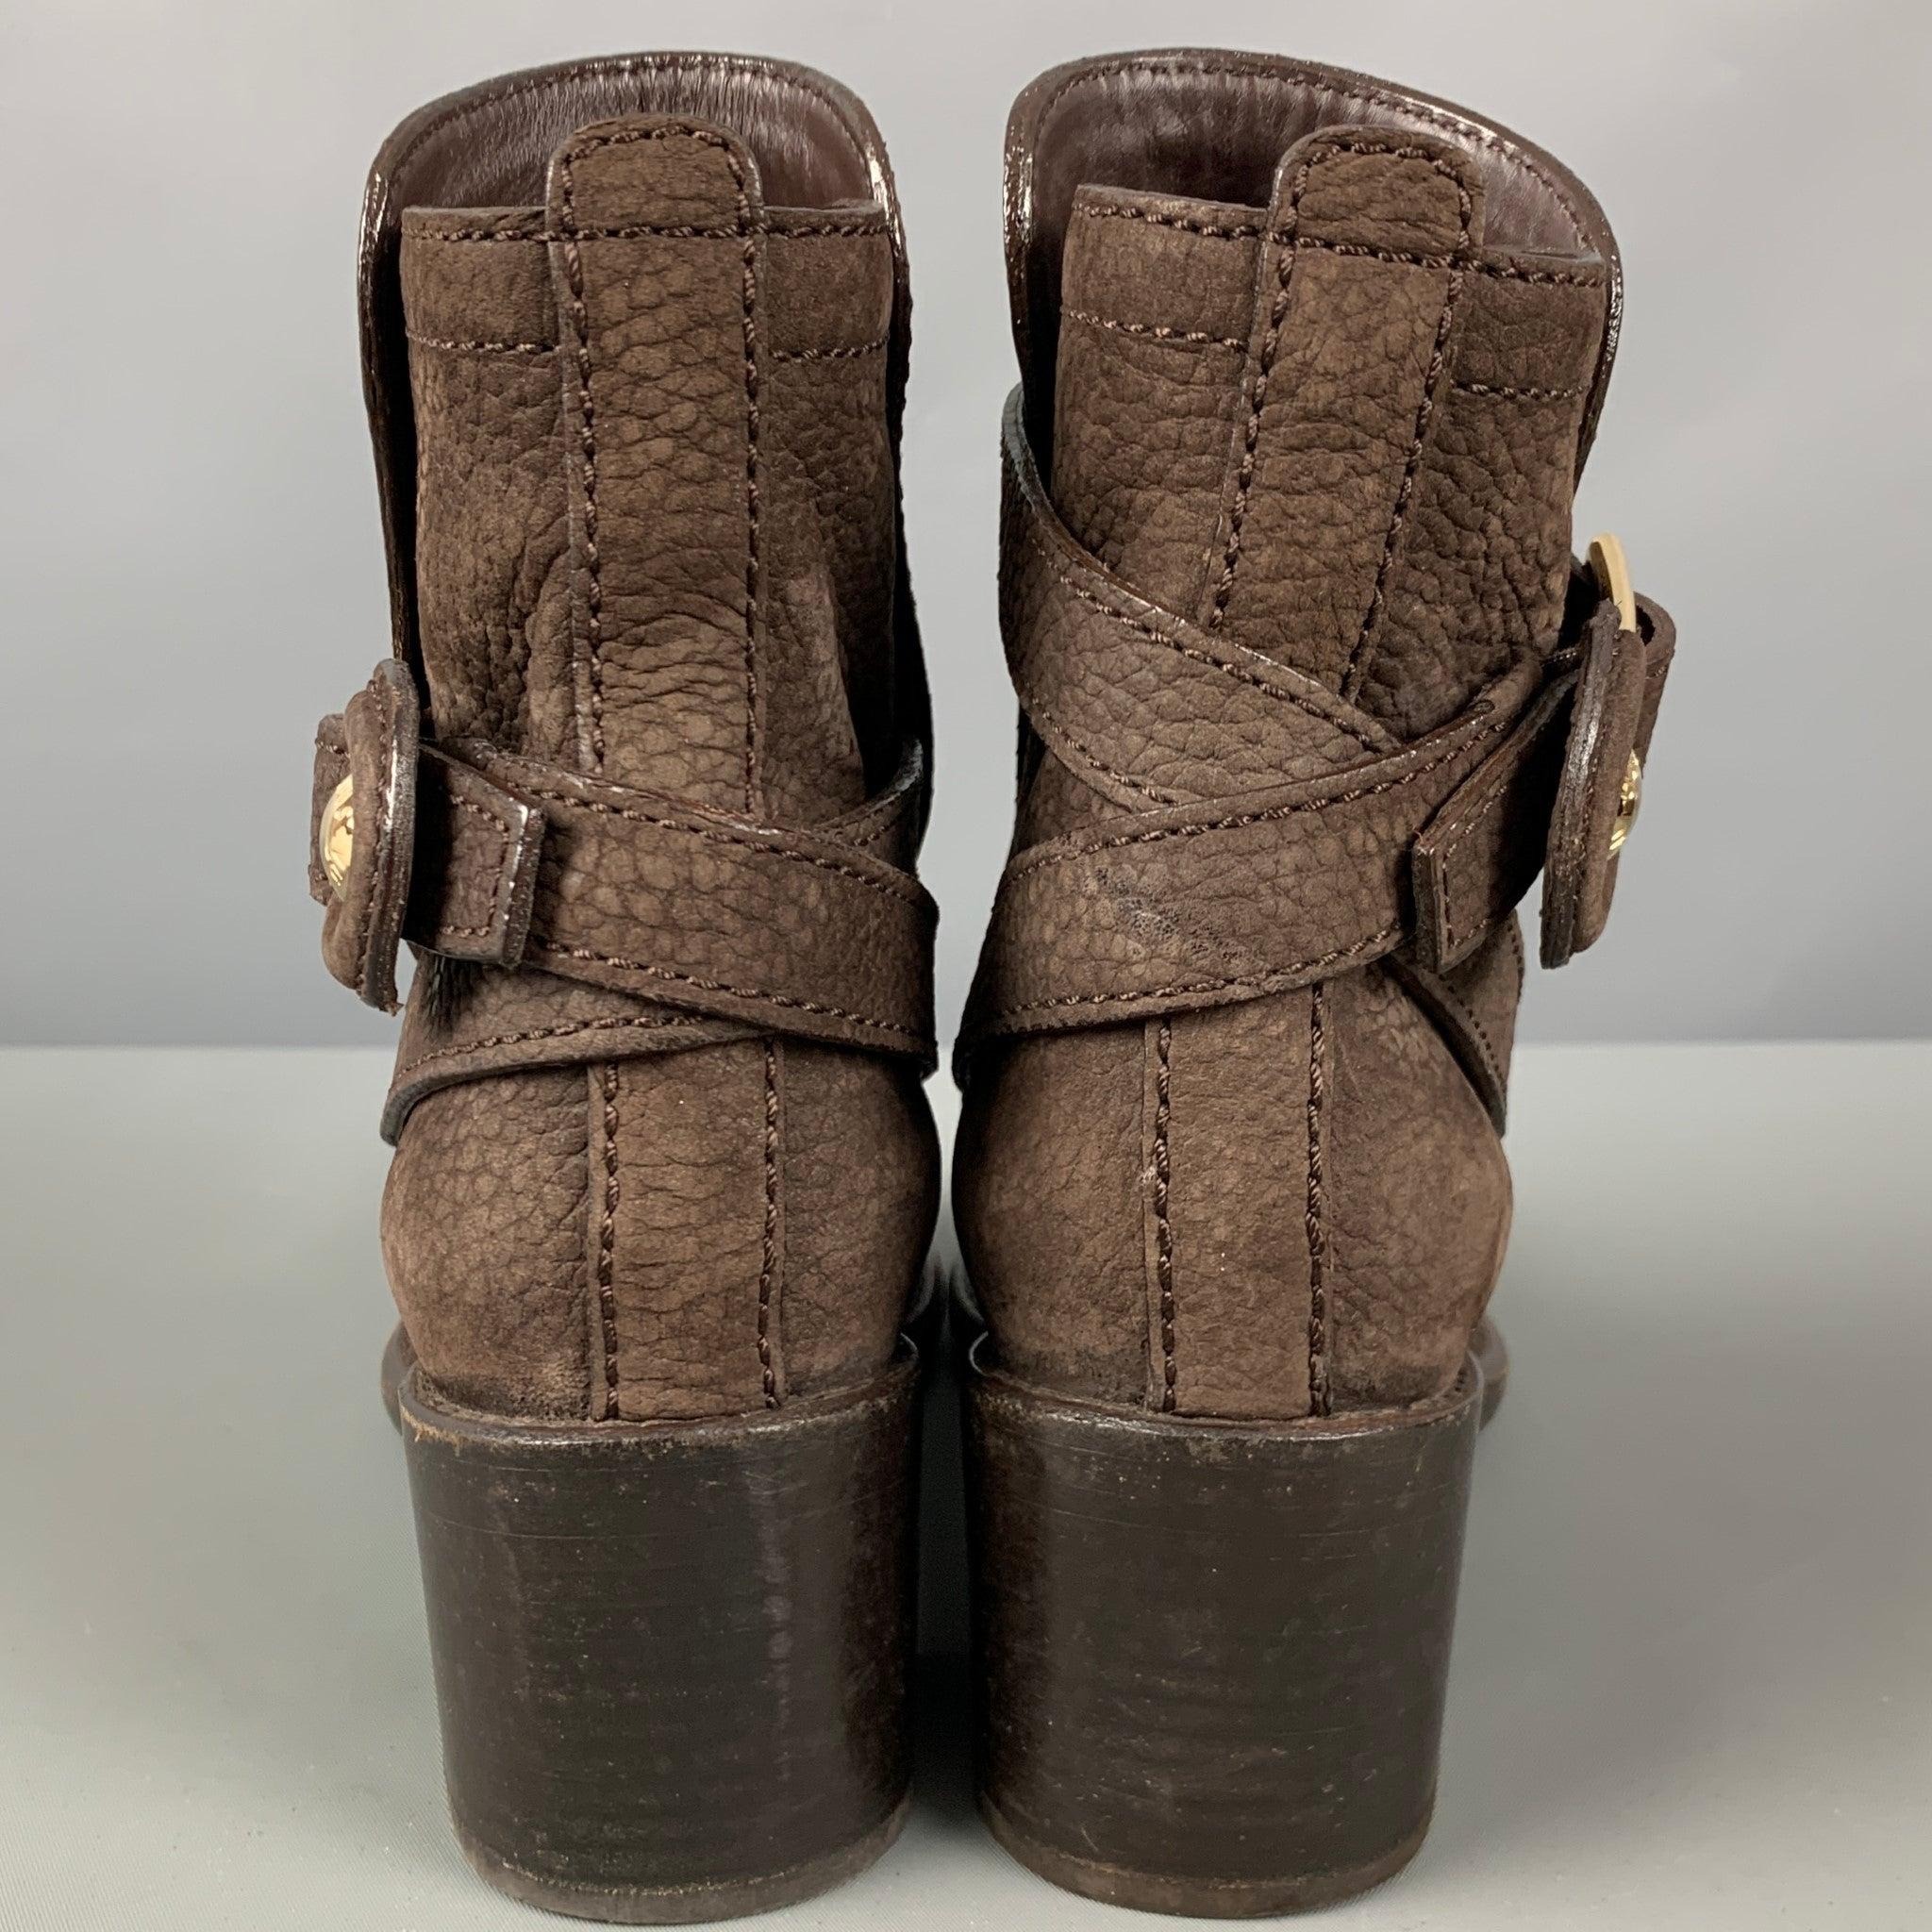 LOUIS VUITTON Size 5.5 Brown Leather Pebble Grain Chunky Heel Boots In Good Condition For Sale In San Francisco, CA